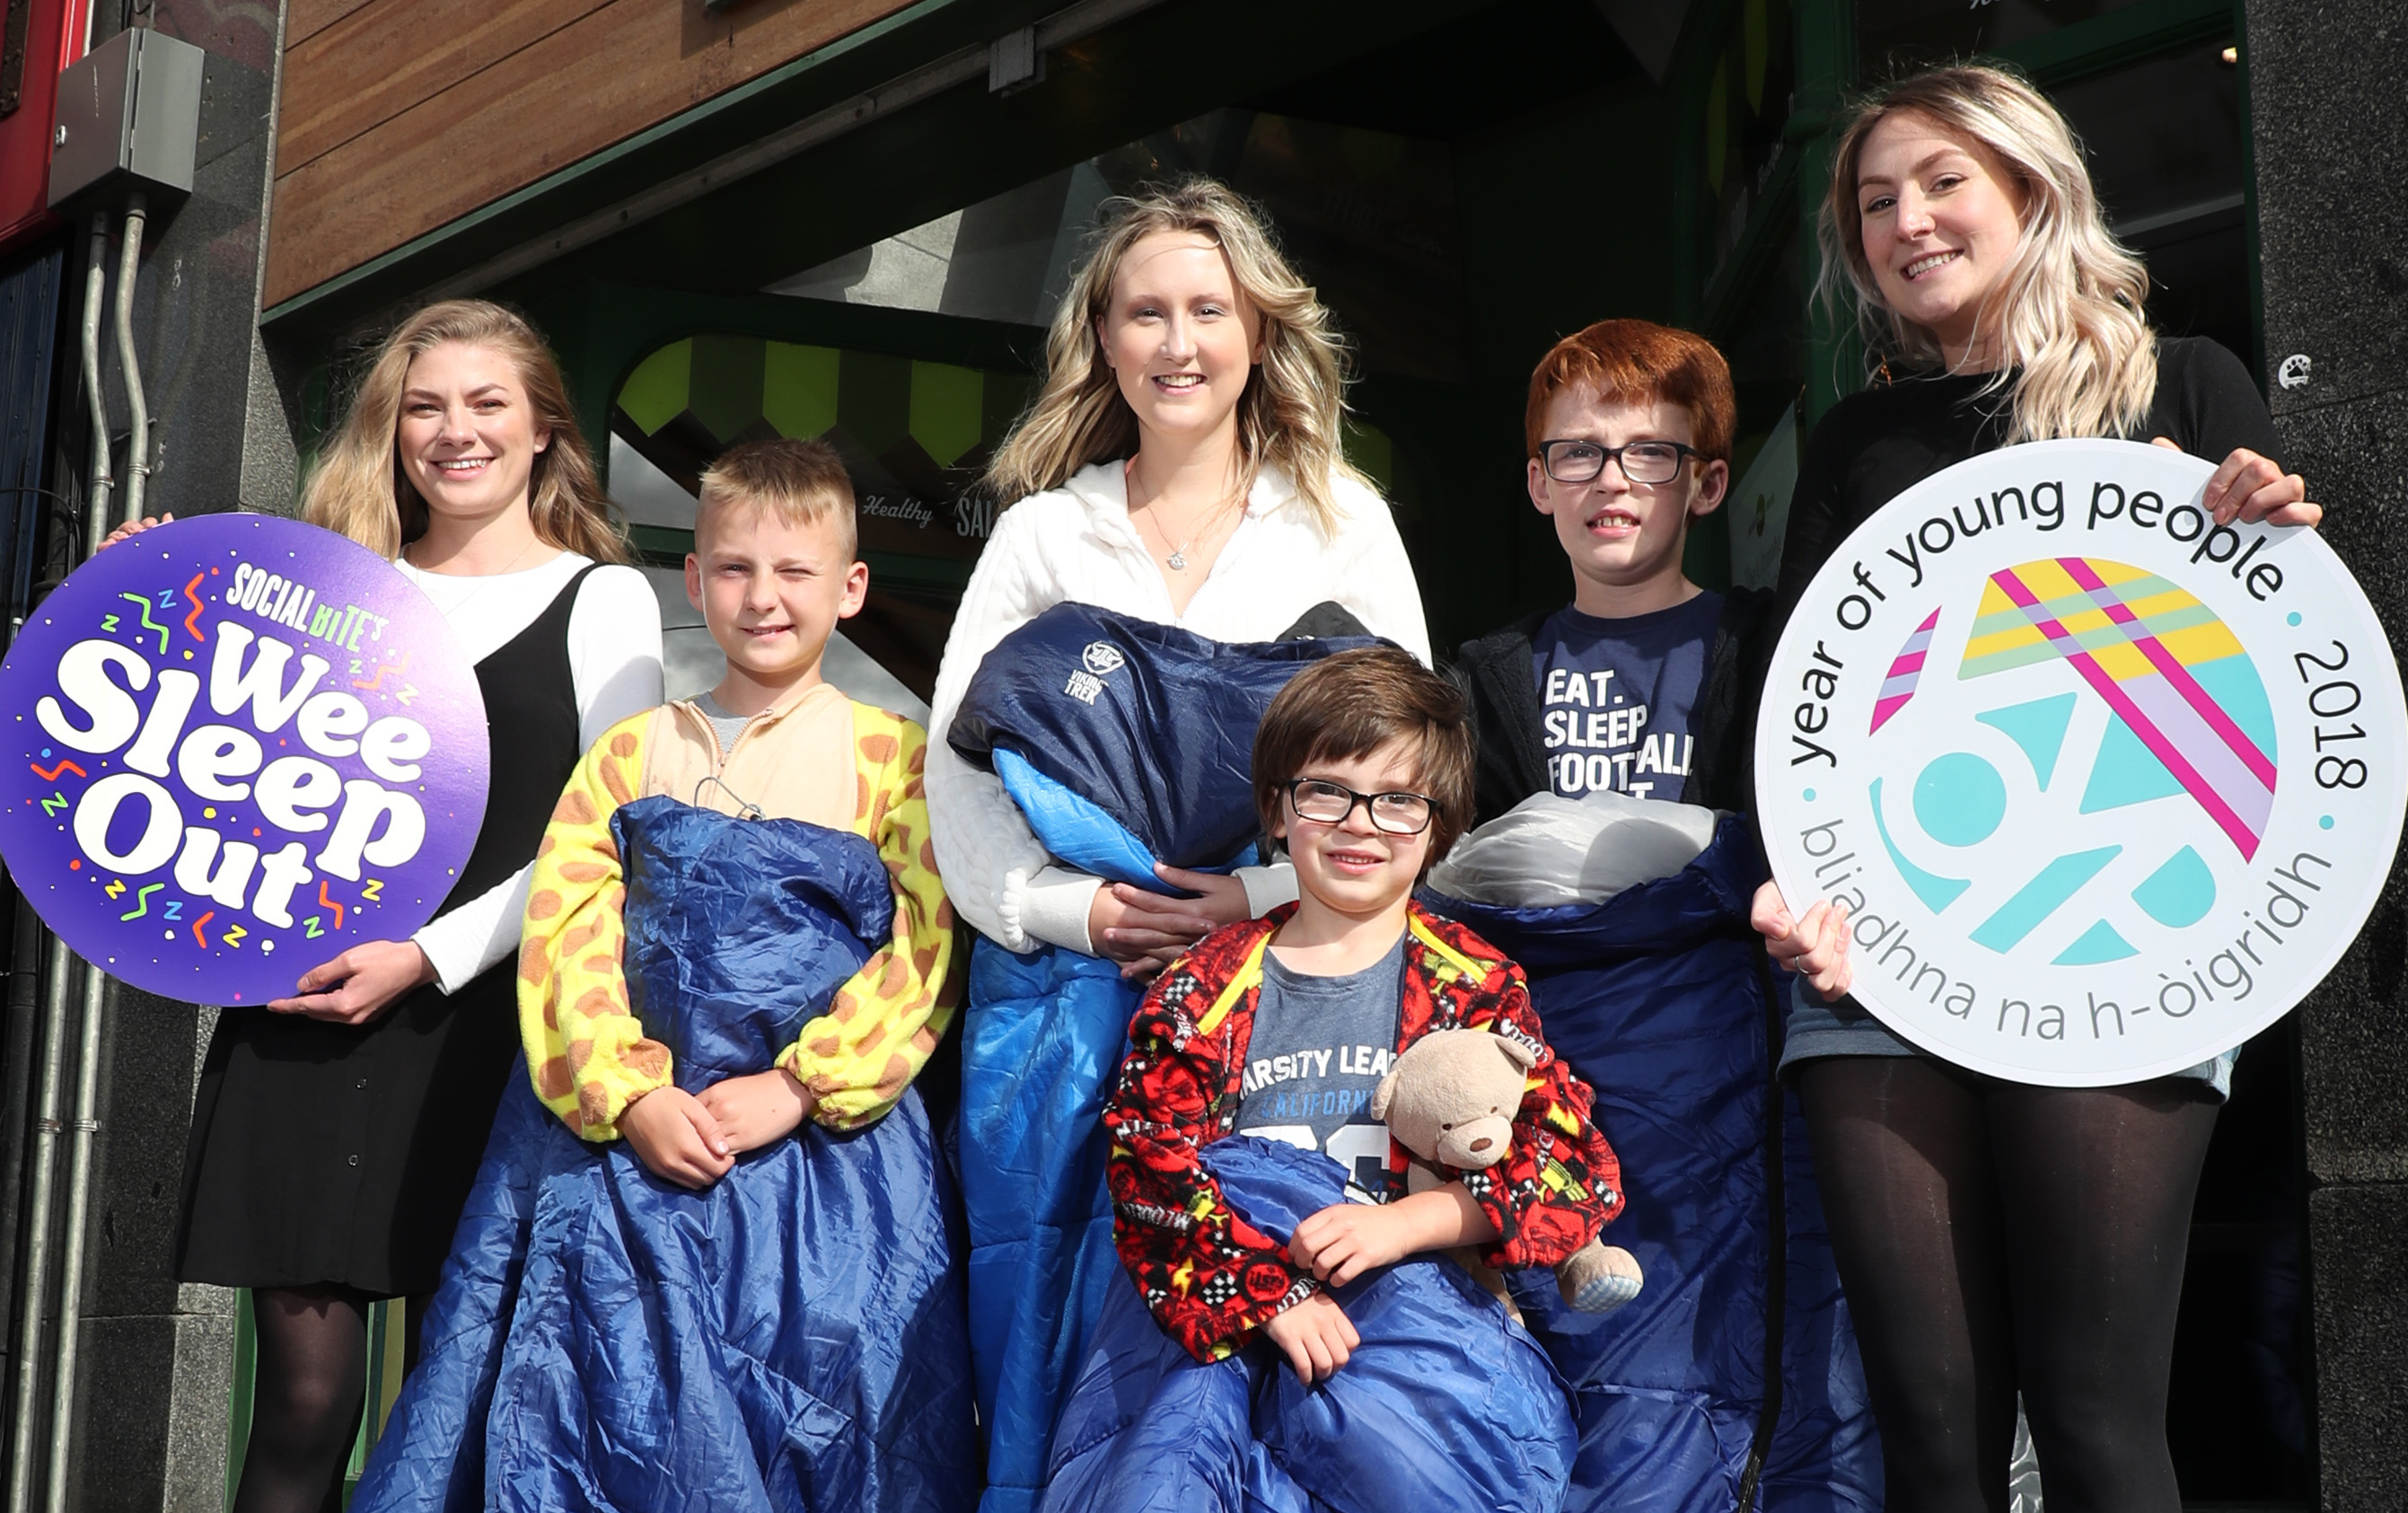 Alice Thompson, co-founder of Social Bite and organiser of the Wee Sleep Out, with fellow staff and a group of kids who are getting on board the project.